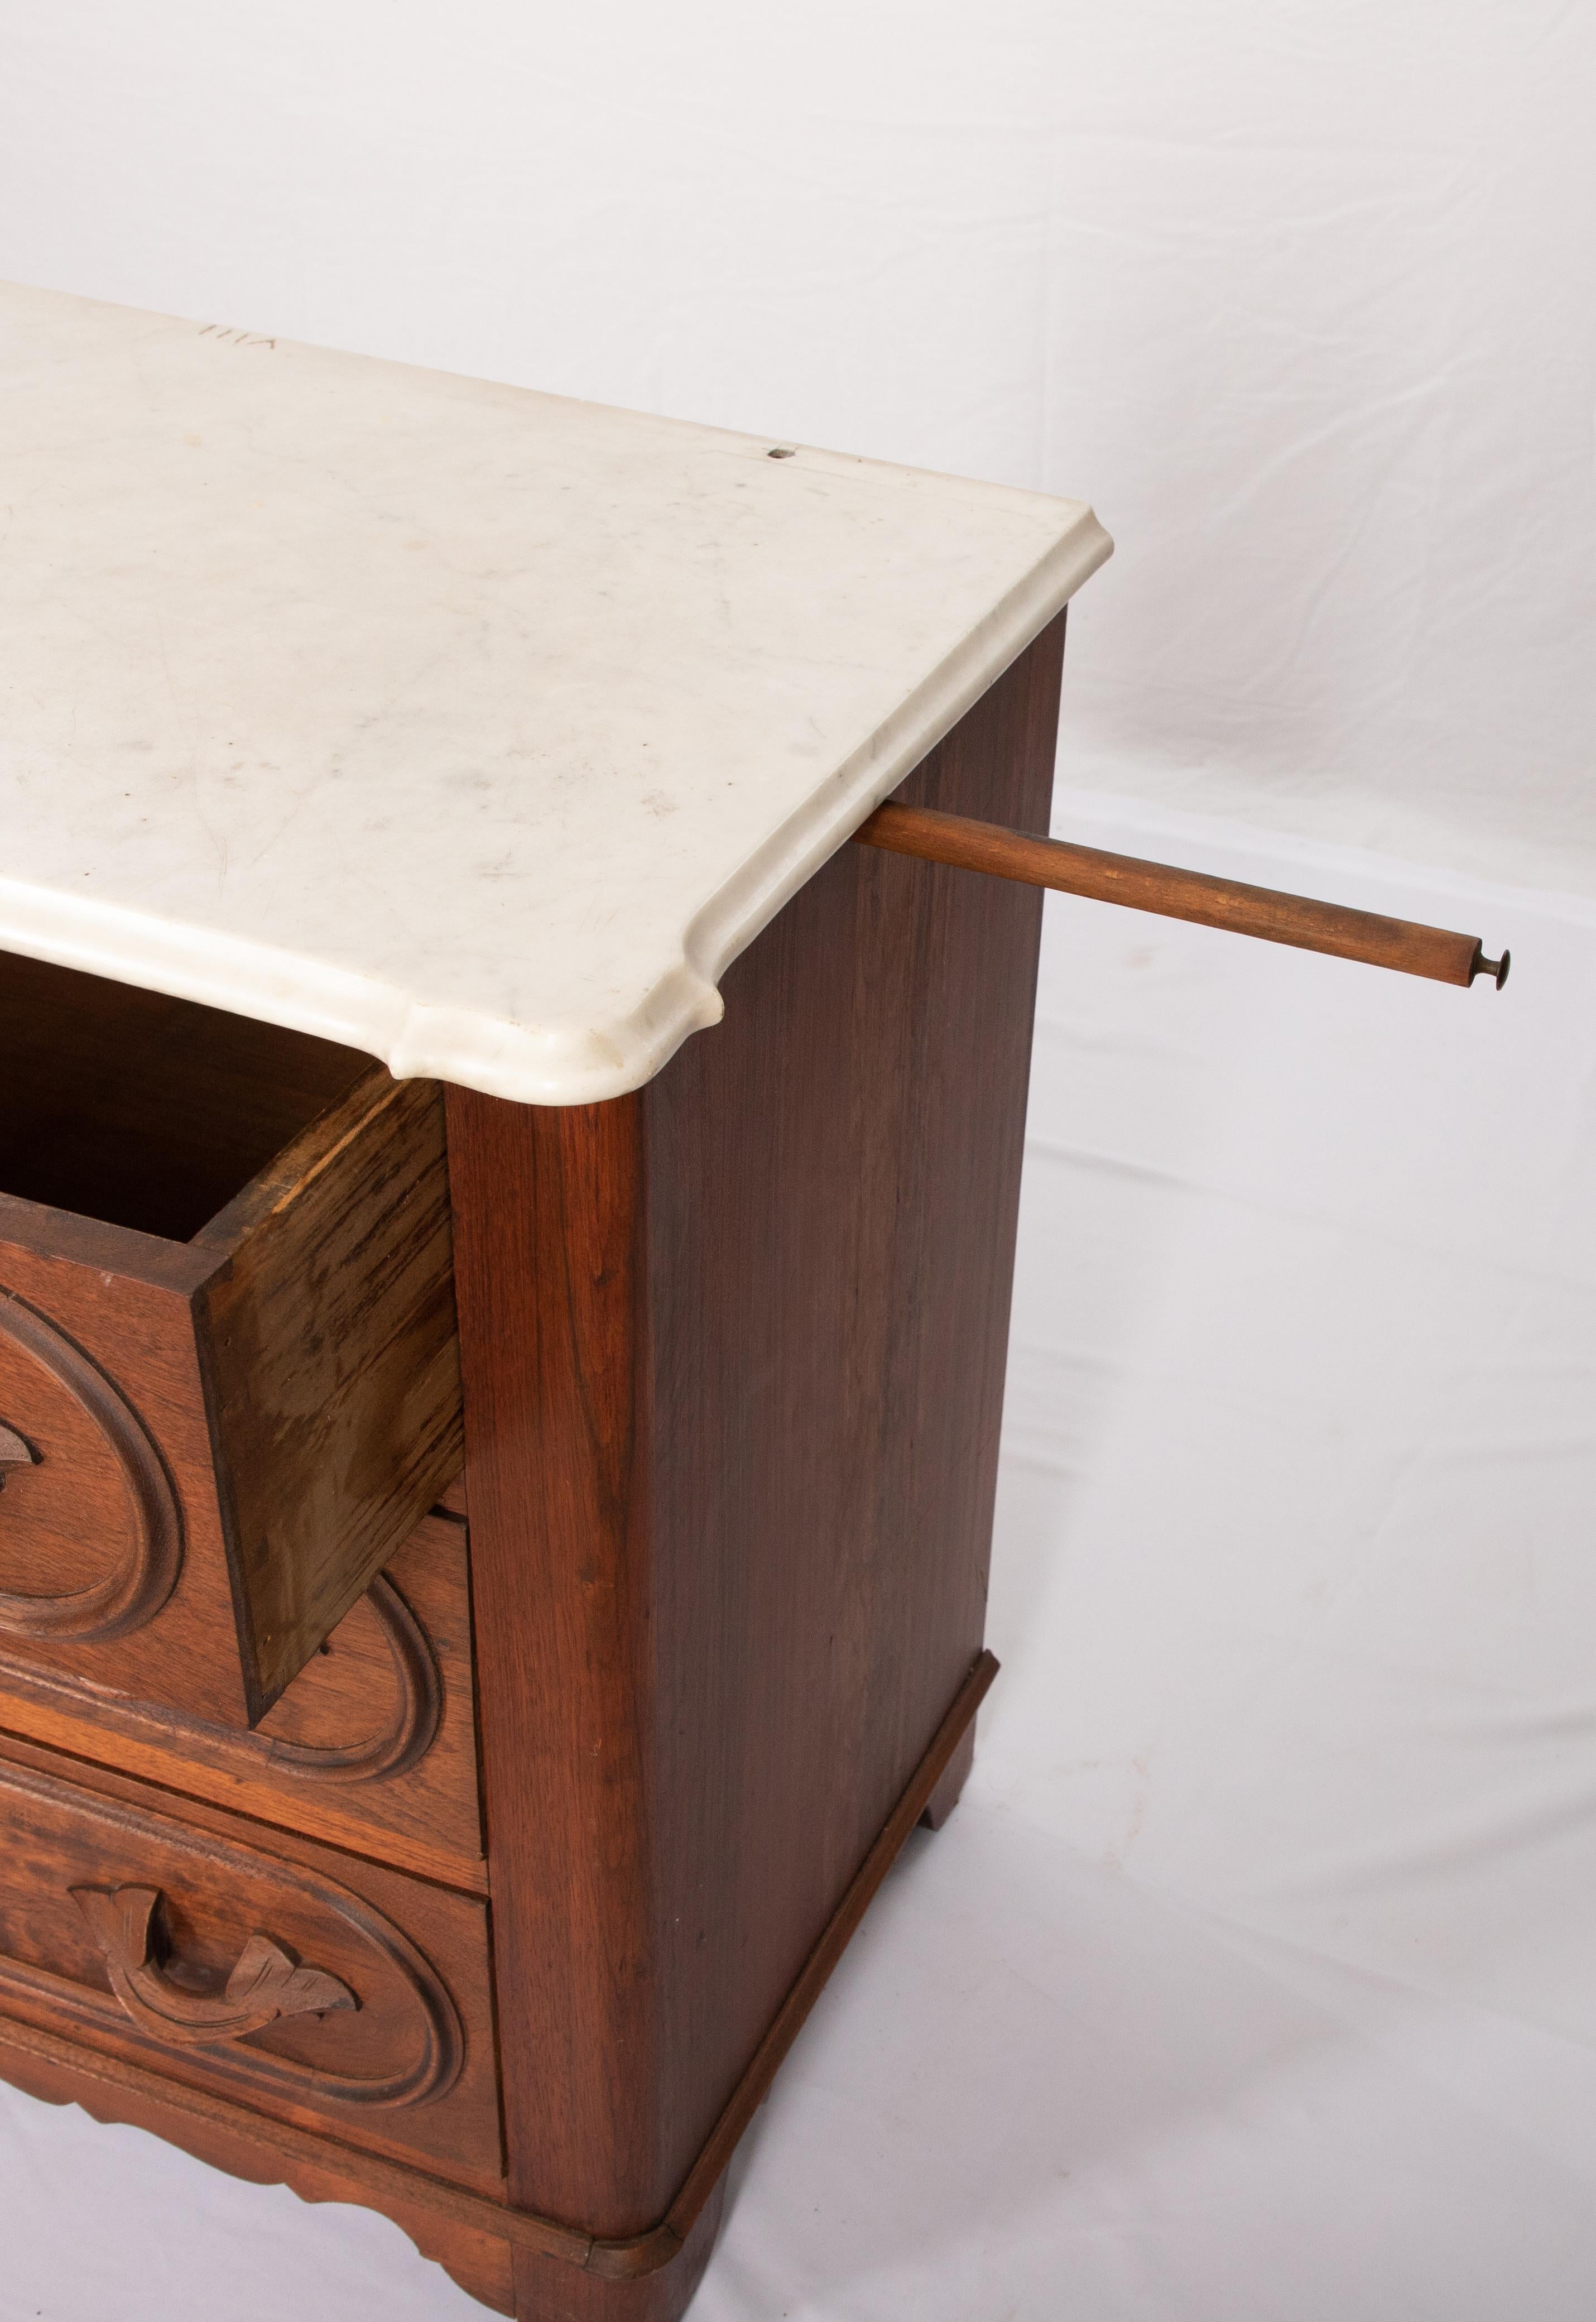 antique washstand with towel bar